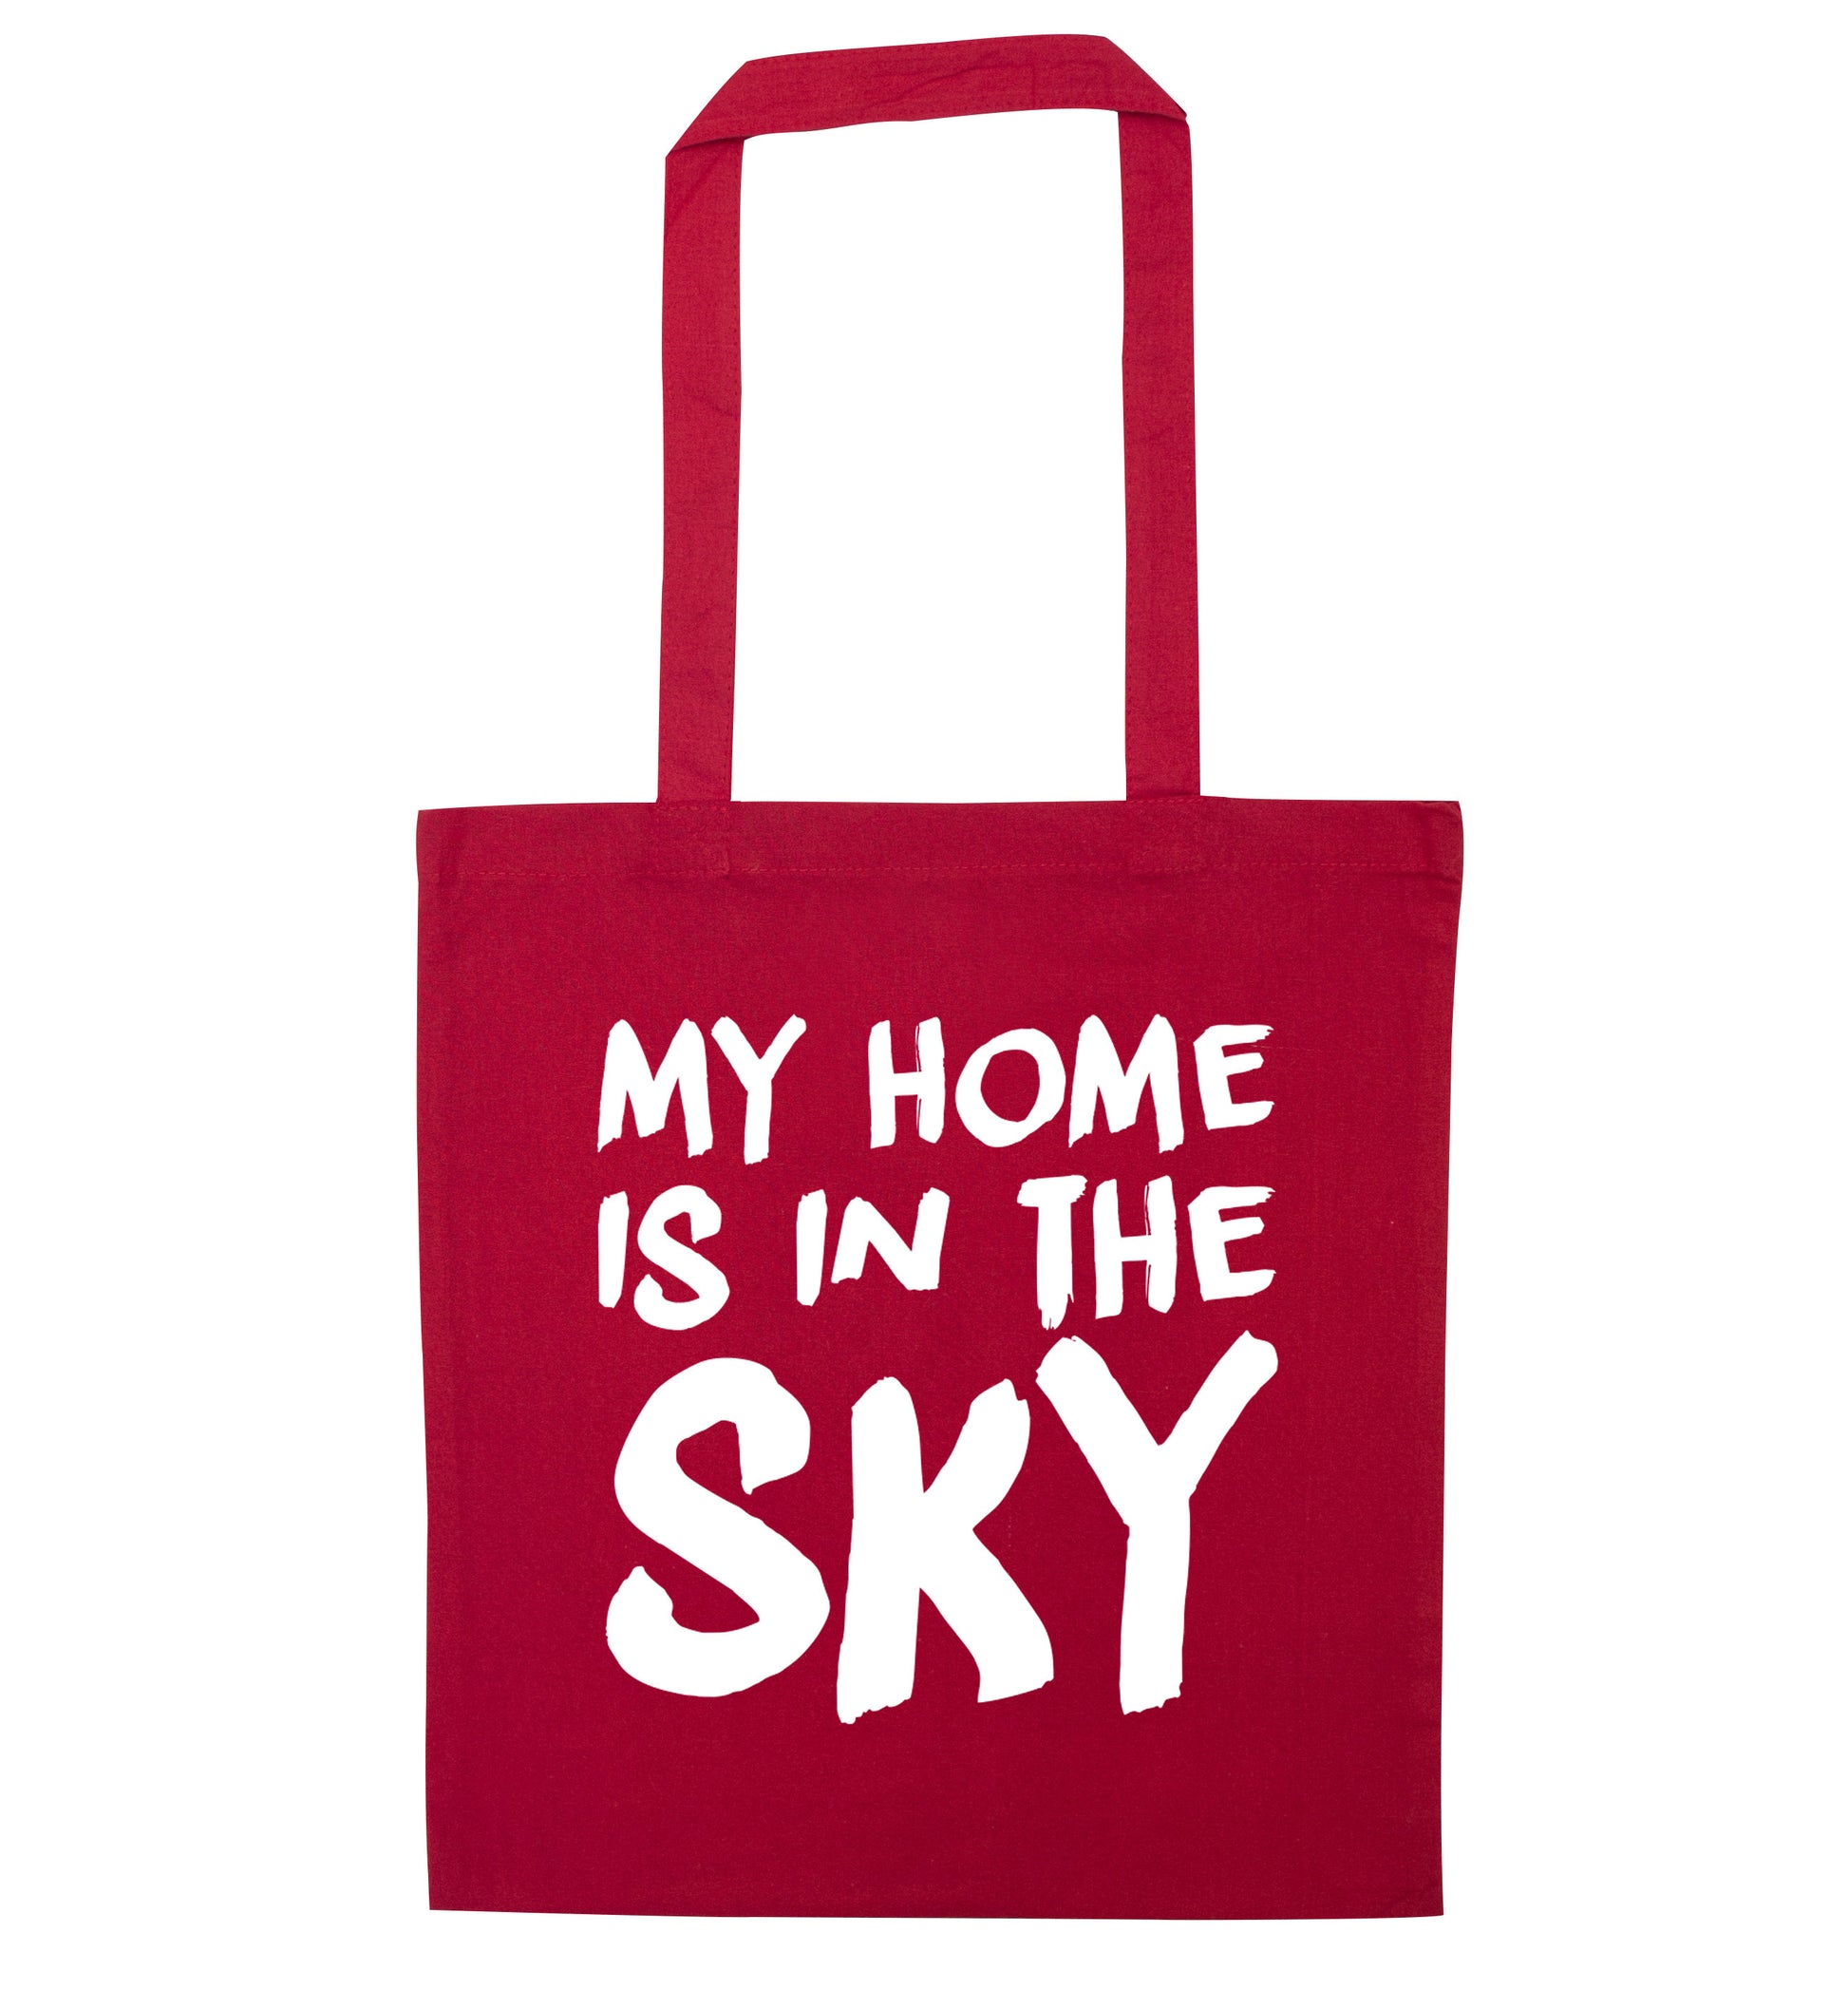 My home is in the sky red tote bag